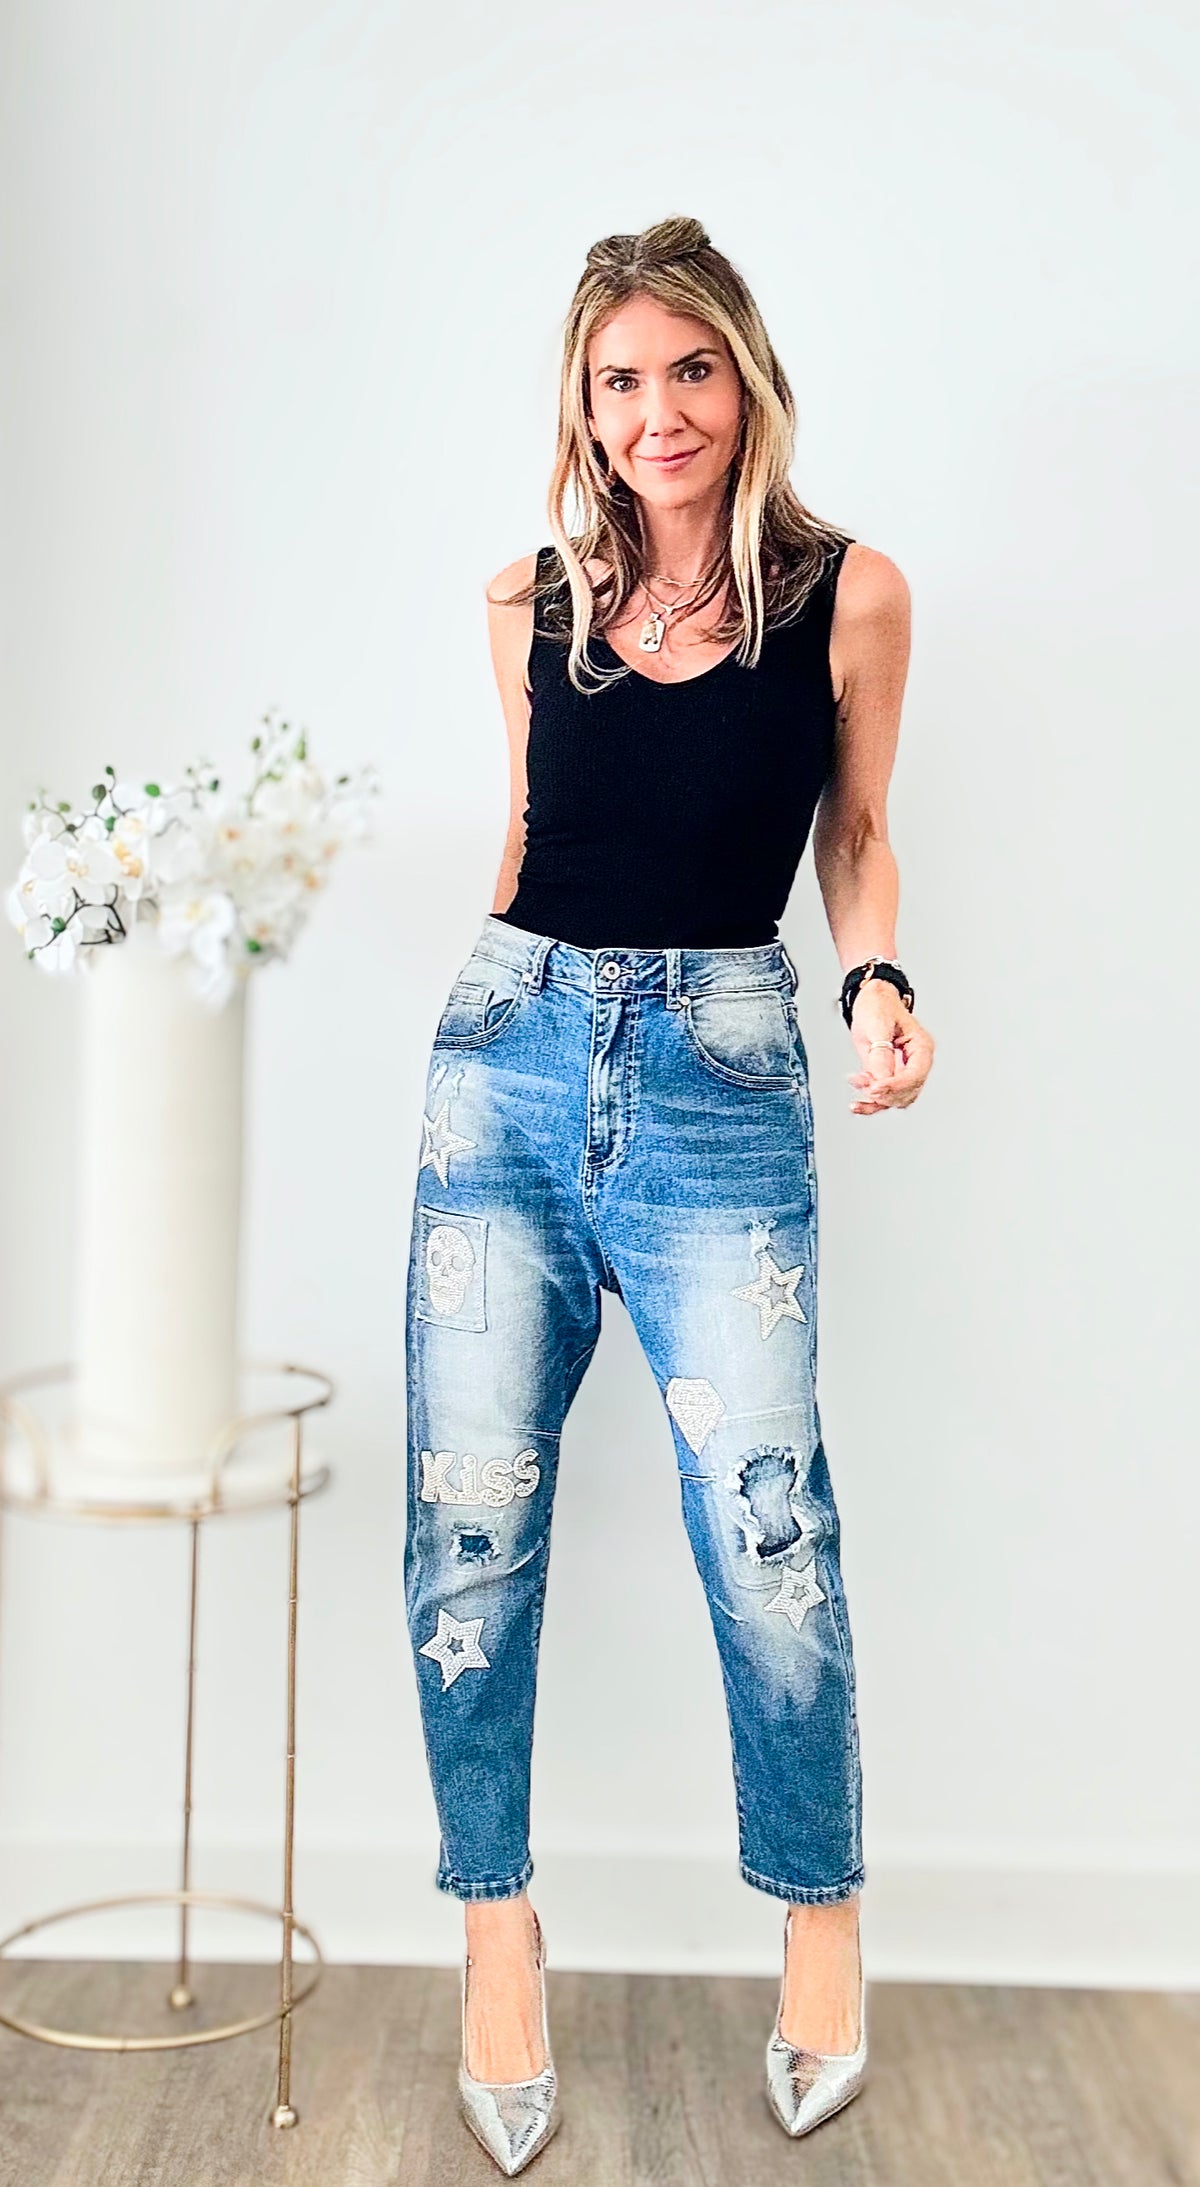 Pearl Adorned Italian Denim-190 Denim-Italianissimo-Coastal Bloom Boutique, find the trendiest versions of the popular styles and looks Located in Indialantic, FL